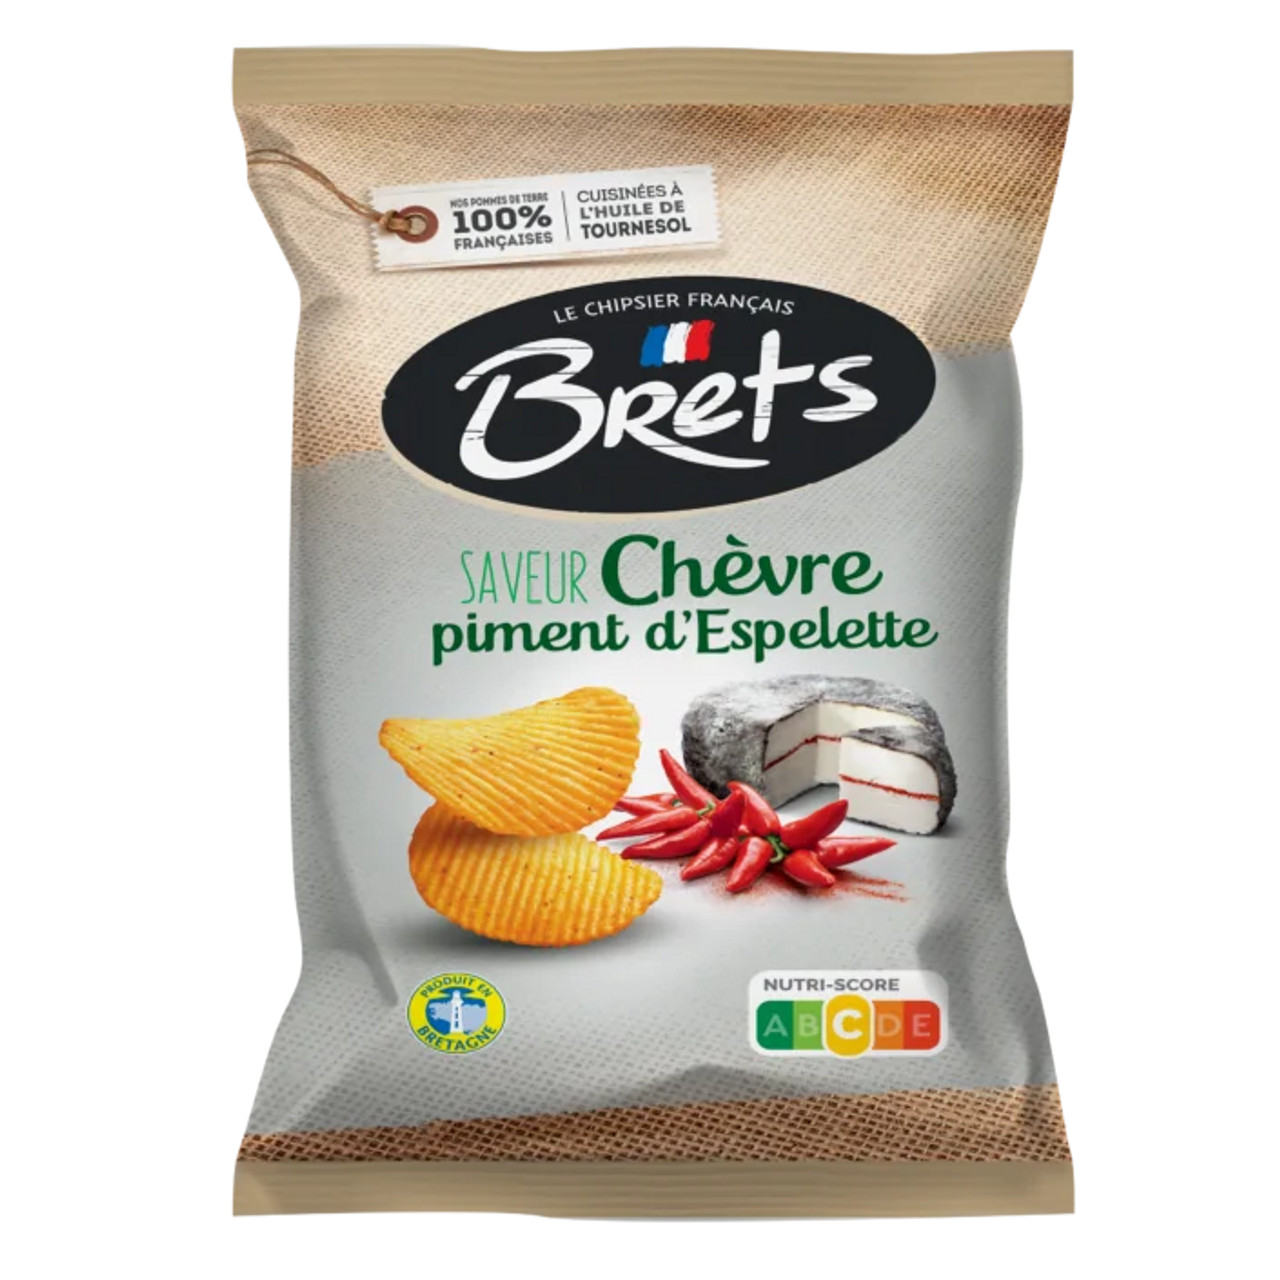 Brets Potato Chips from Brittany — Goat Cheese & Espelette Pepper Flavor  125g